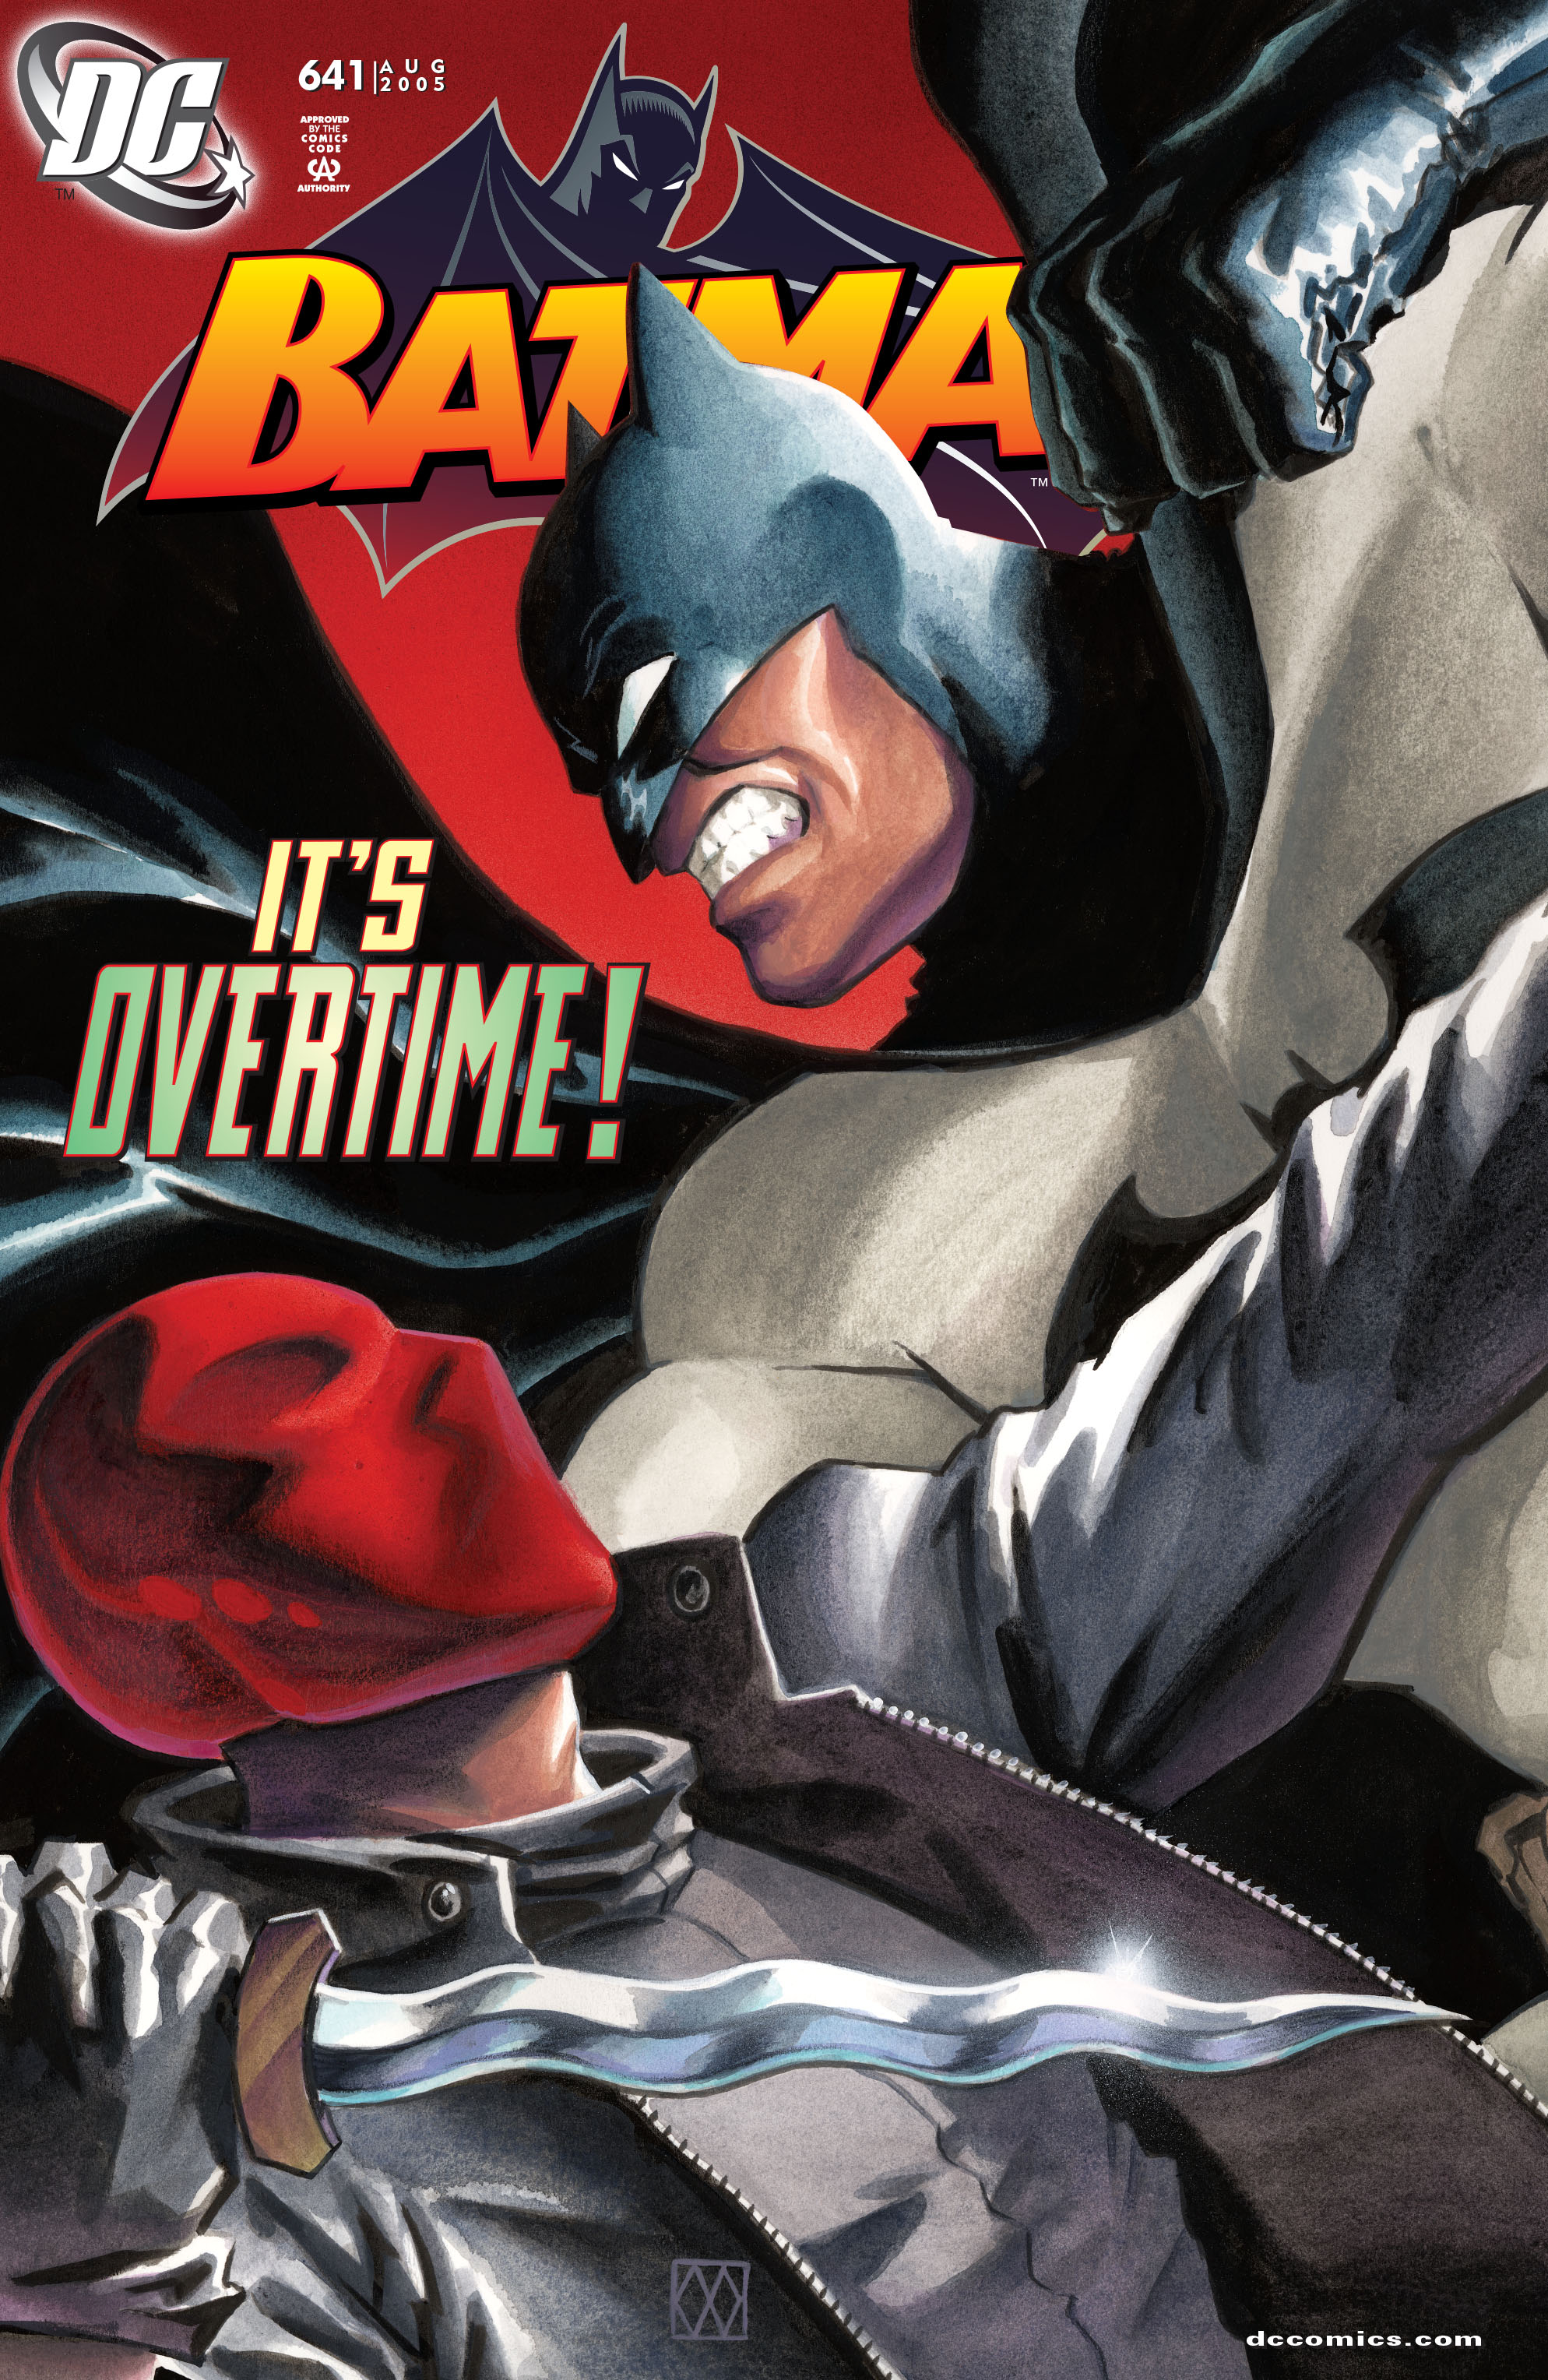 Batman 1940 Issue 641 | Read Batman 1940 Issue 641 comic online in high  quality. Read Full Comic online for free - Read comics online in high  quality .| READ COMIC ONLINE